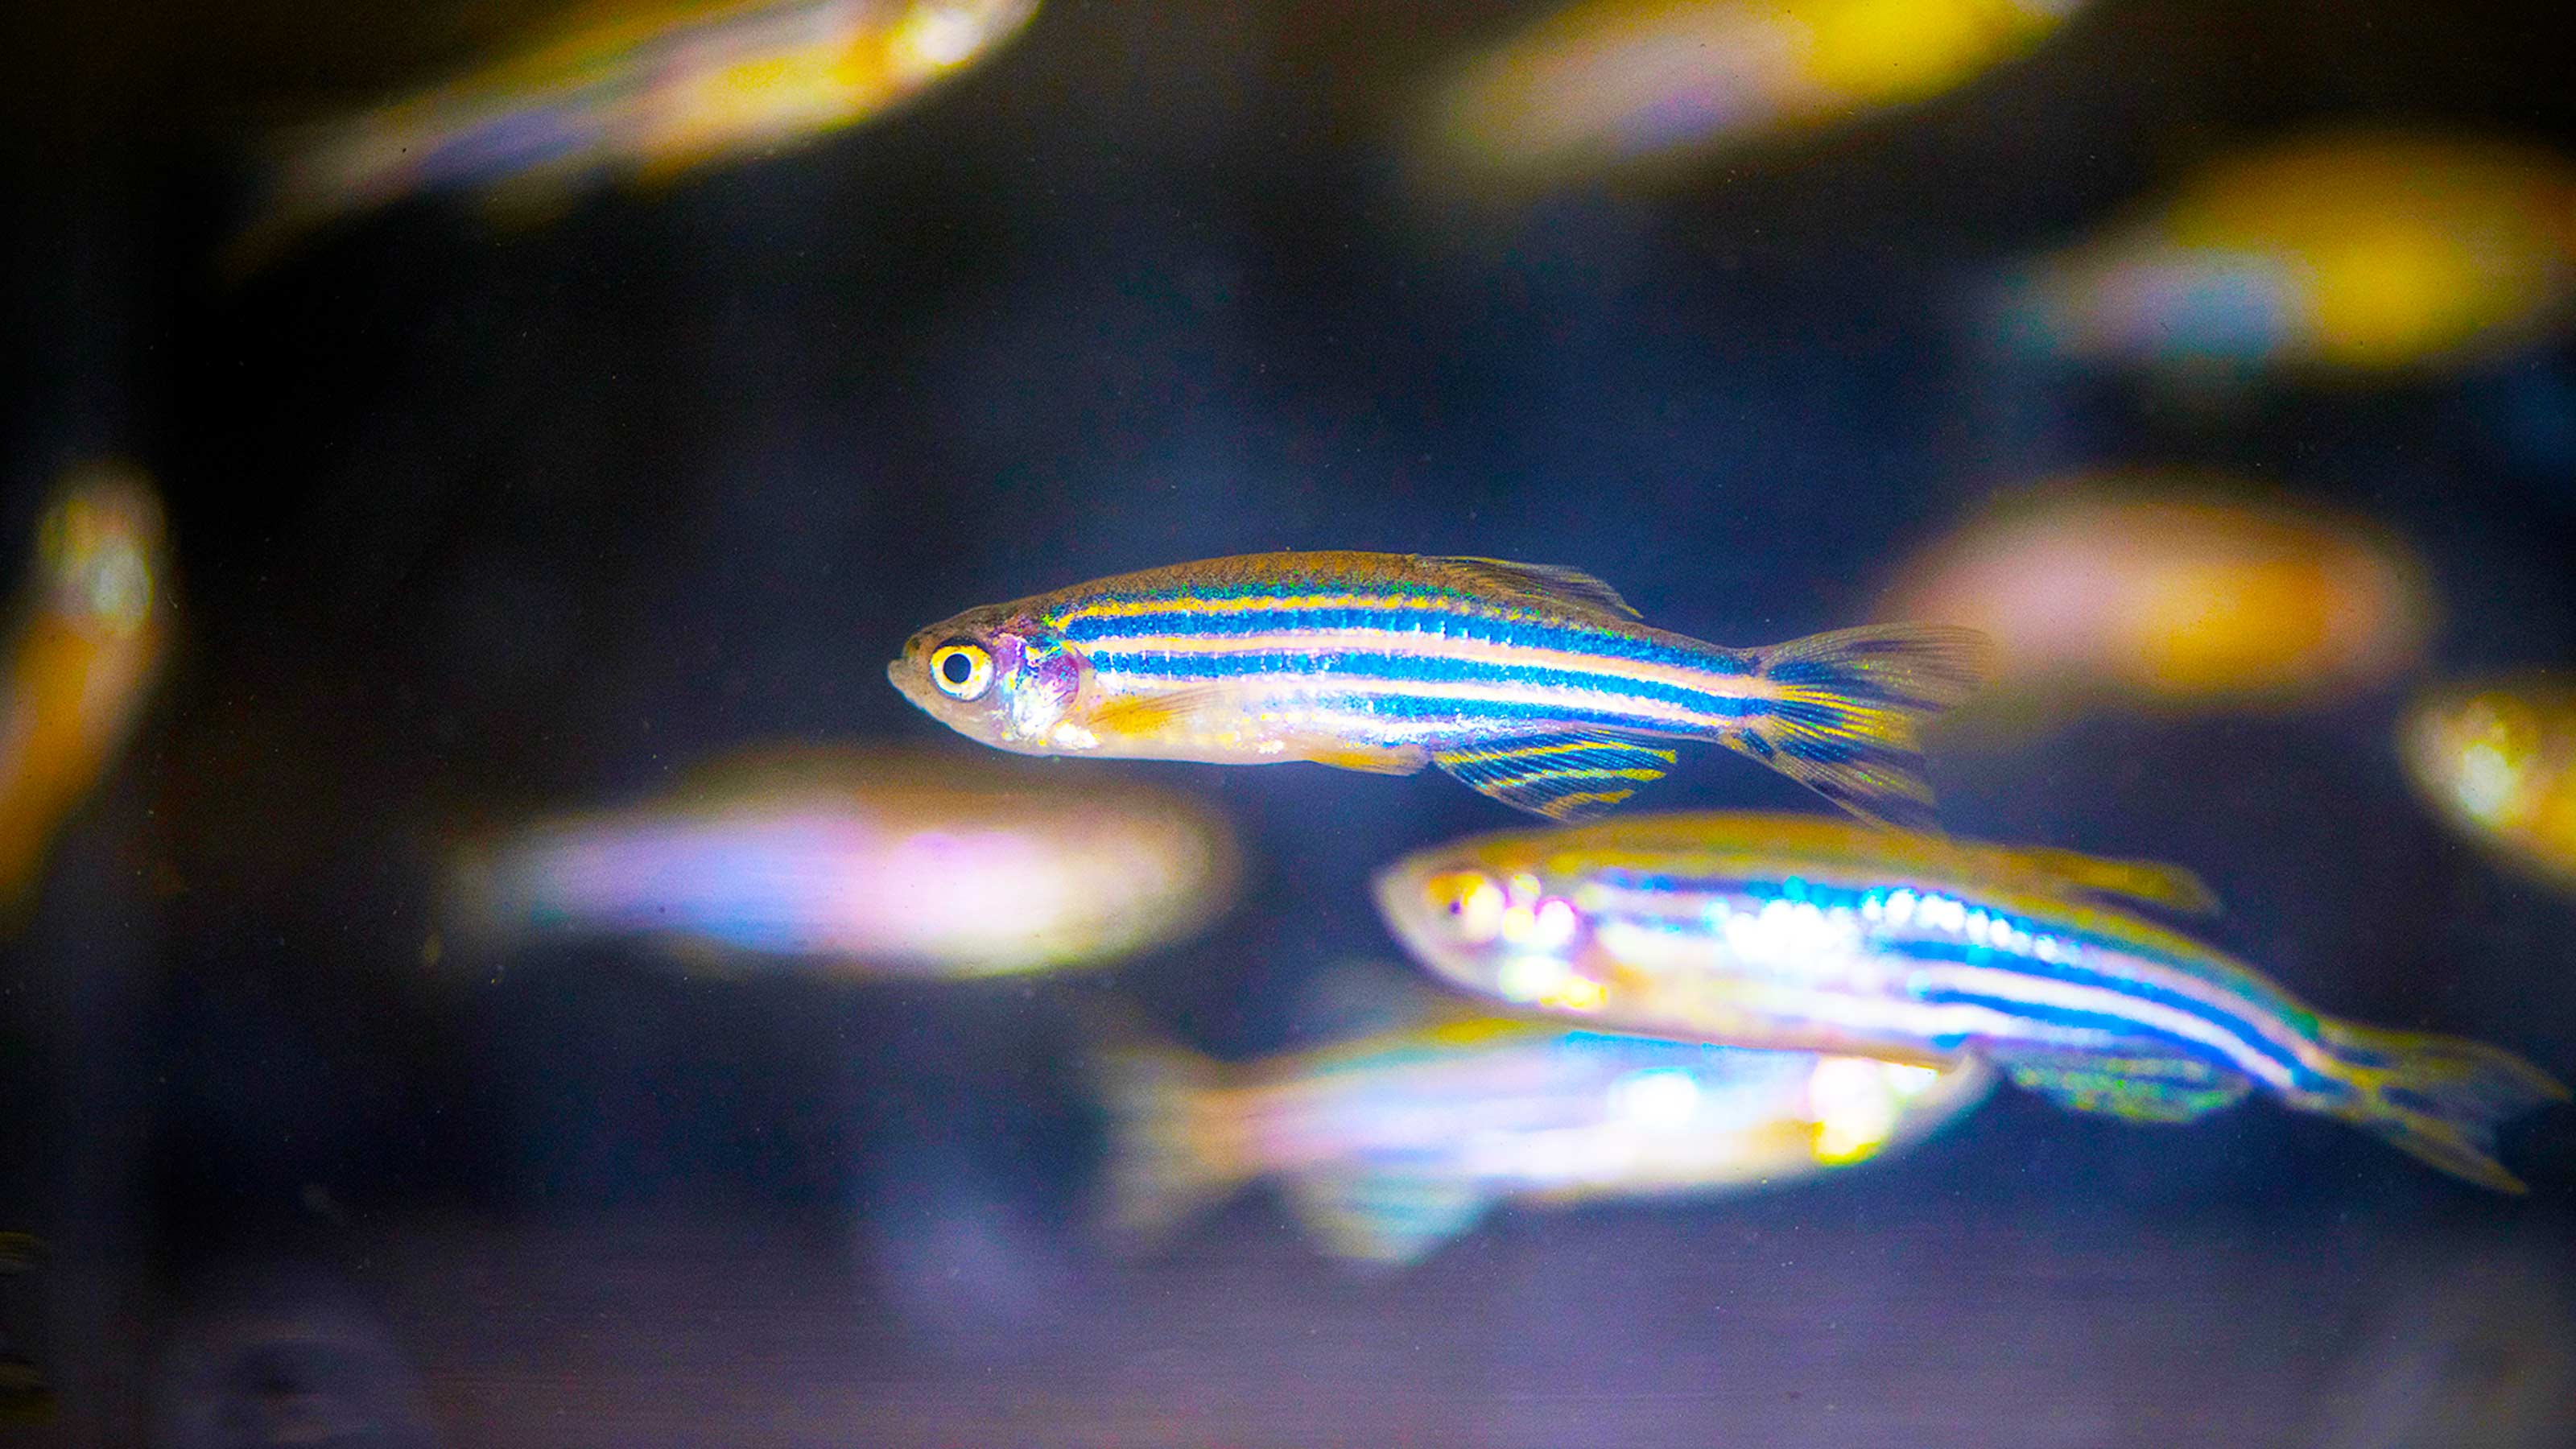 The scientific wonders of zebrafish for biomedical research